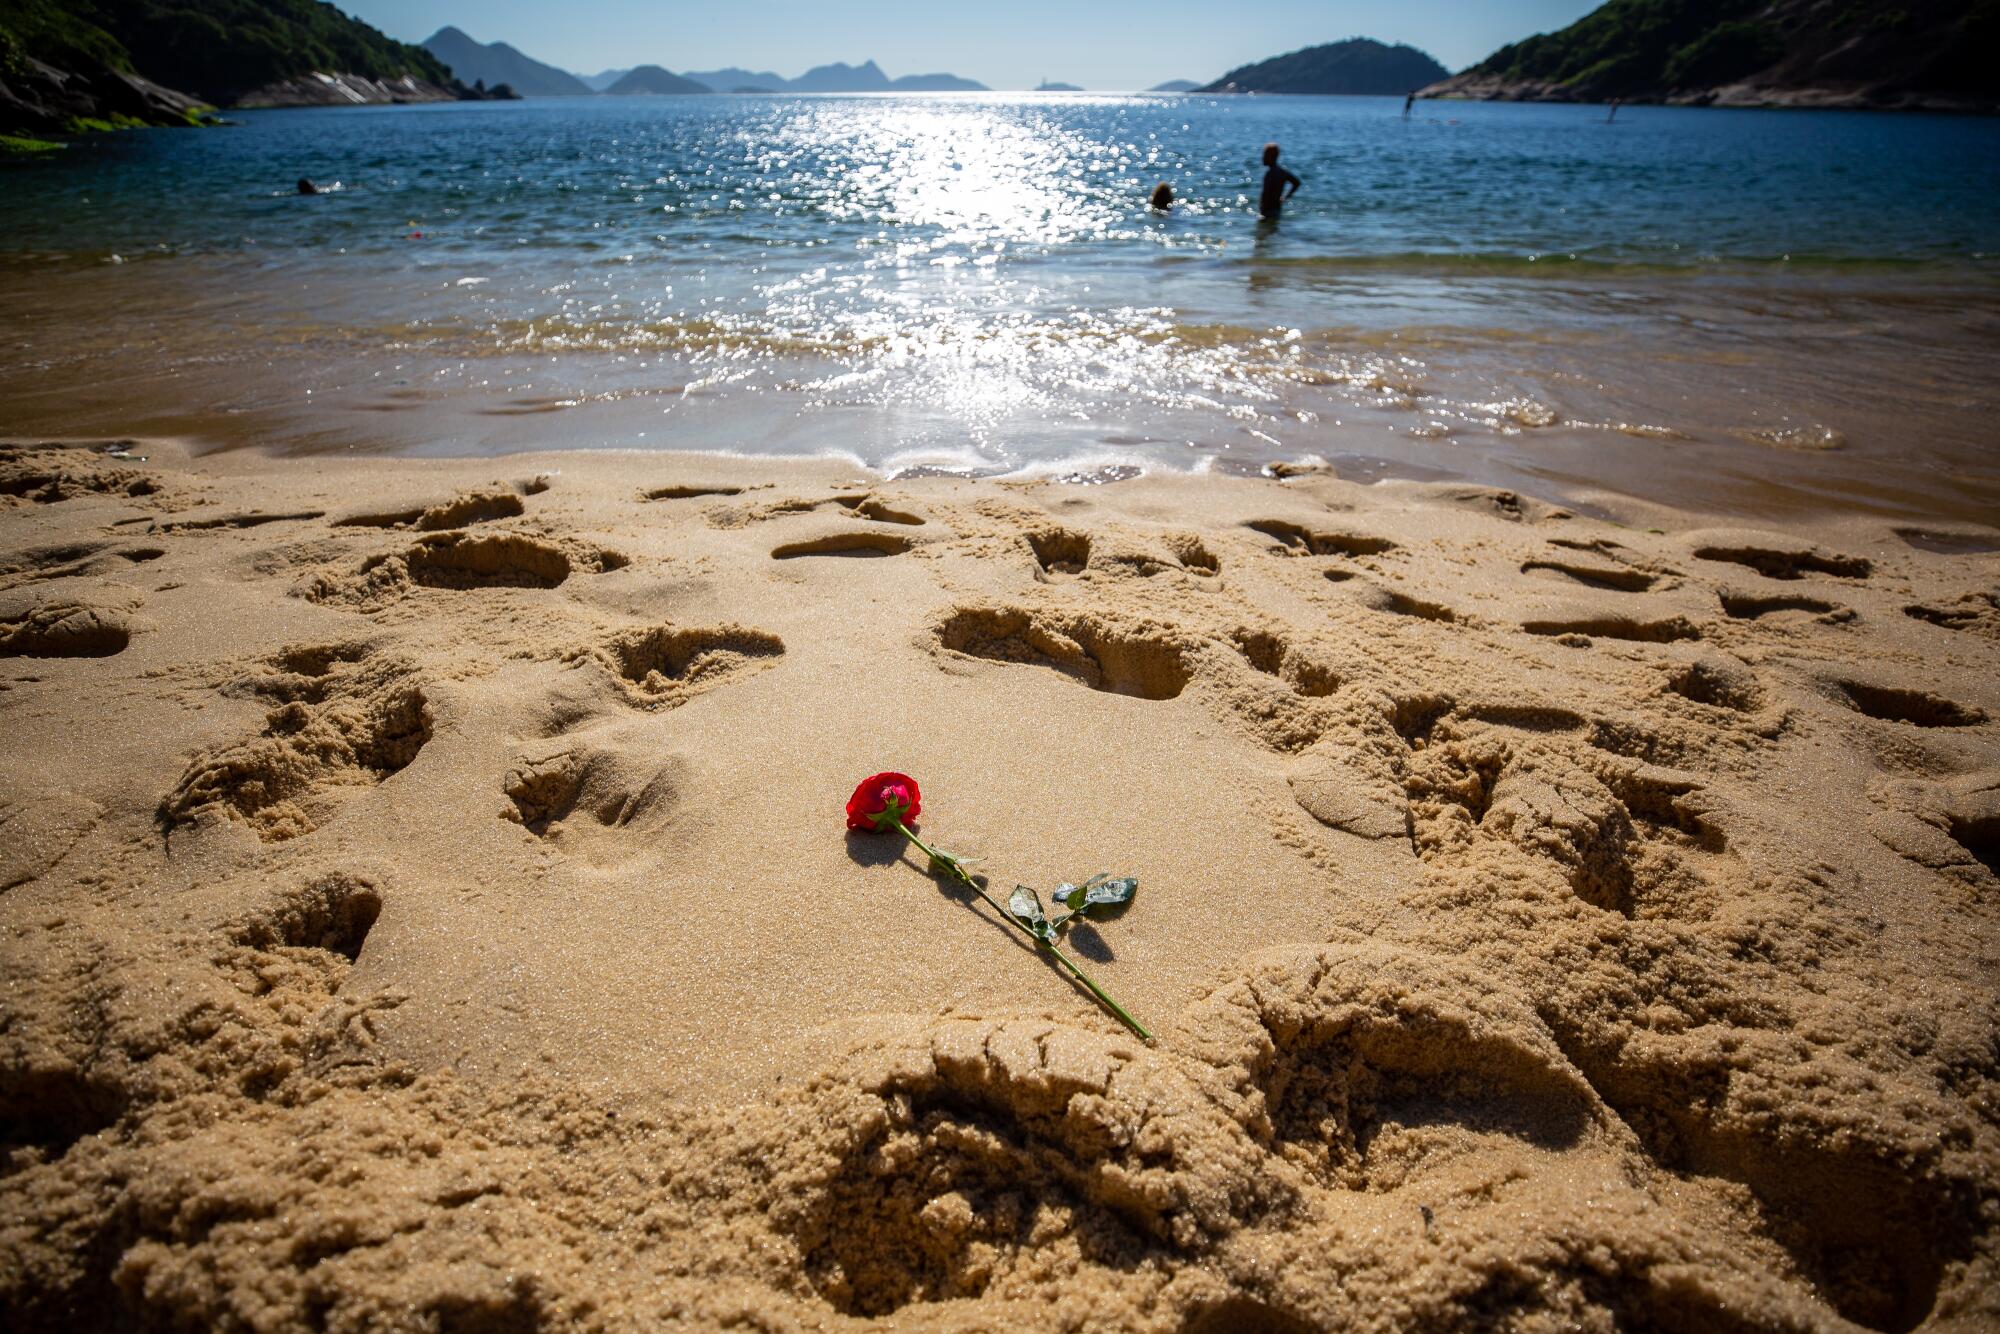 A long-stemmed red rose, surrounded by footprints, lies atop the sand at a beach.